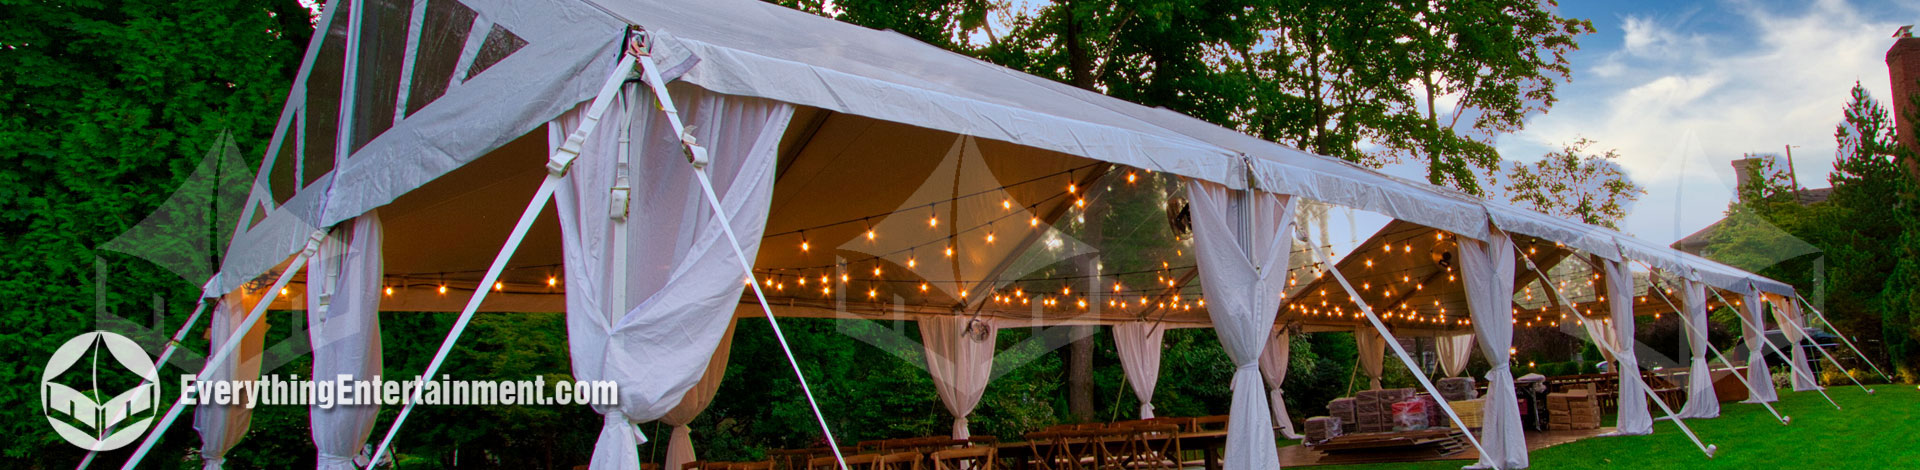 long 30x90 foot tent setup in backyard with rustic decor.